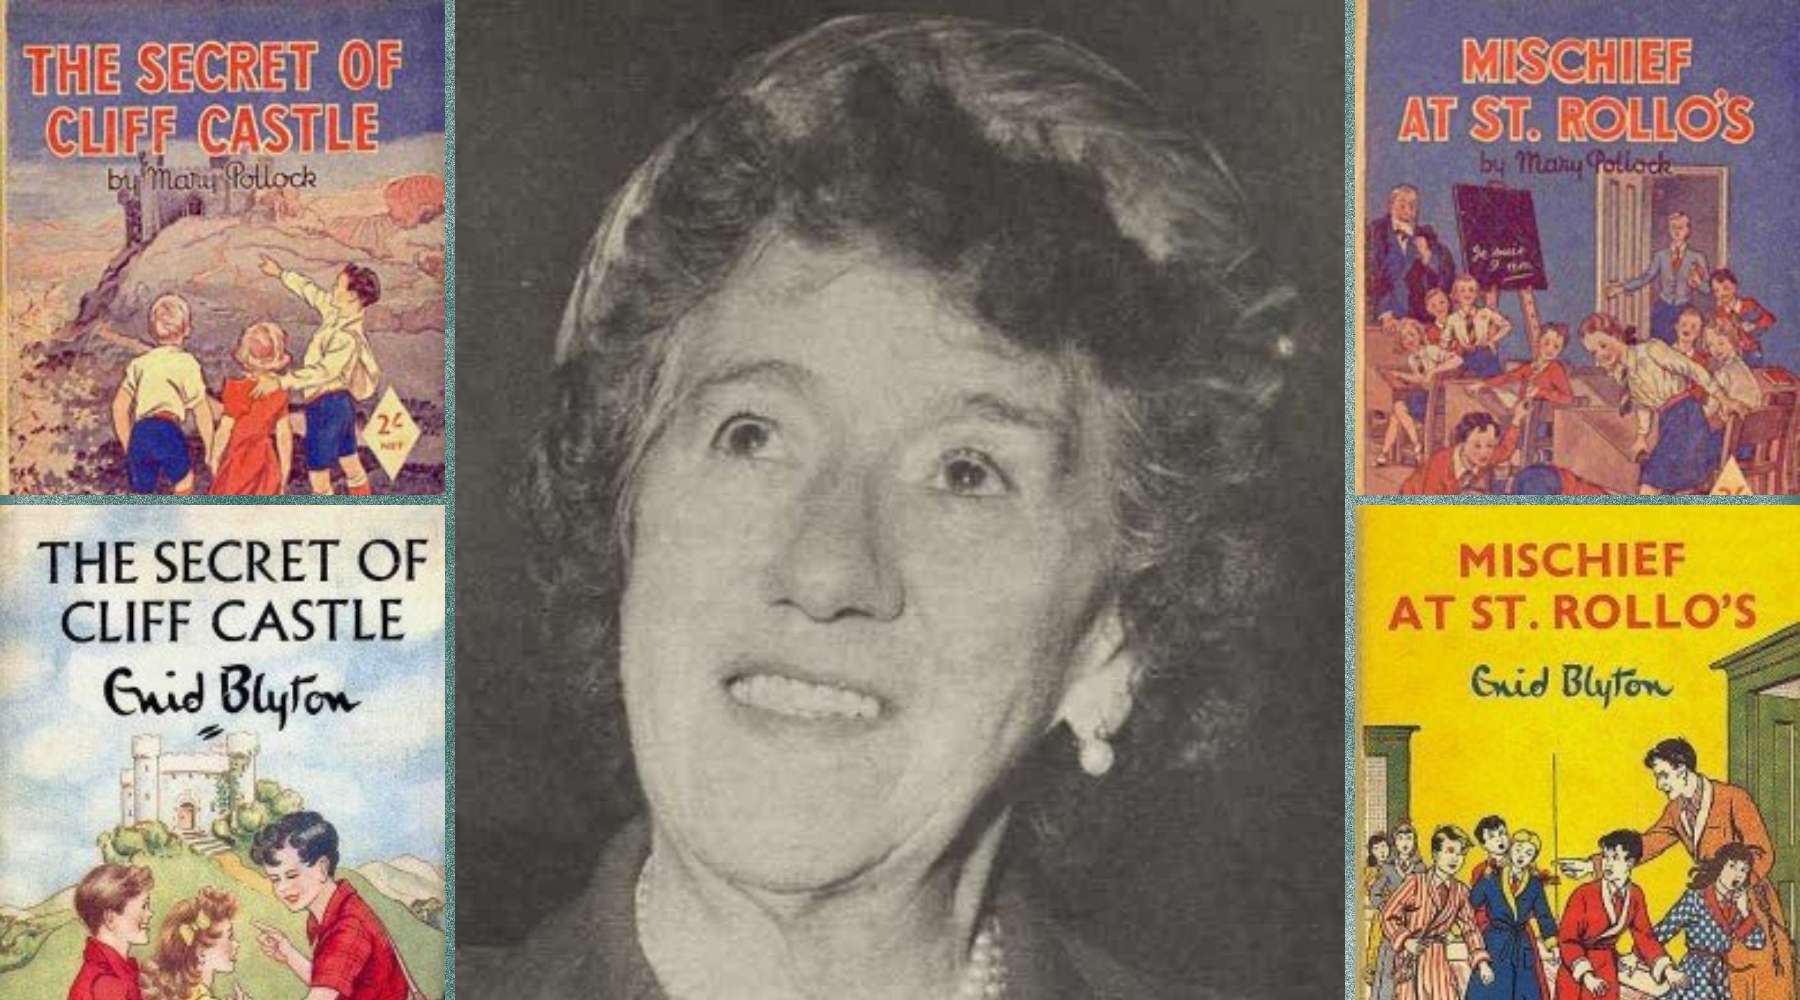 Enid Blyton and Mary Pollock: What really happened?